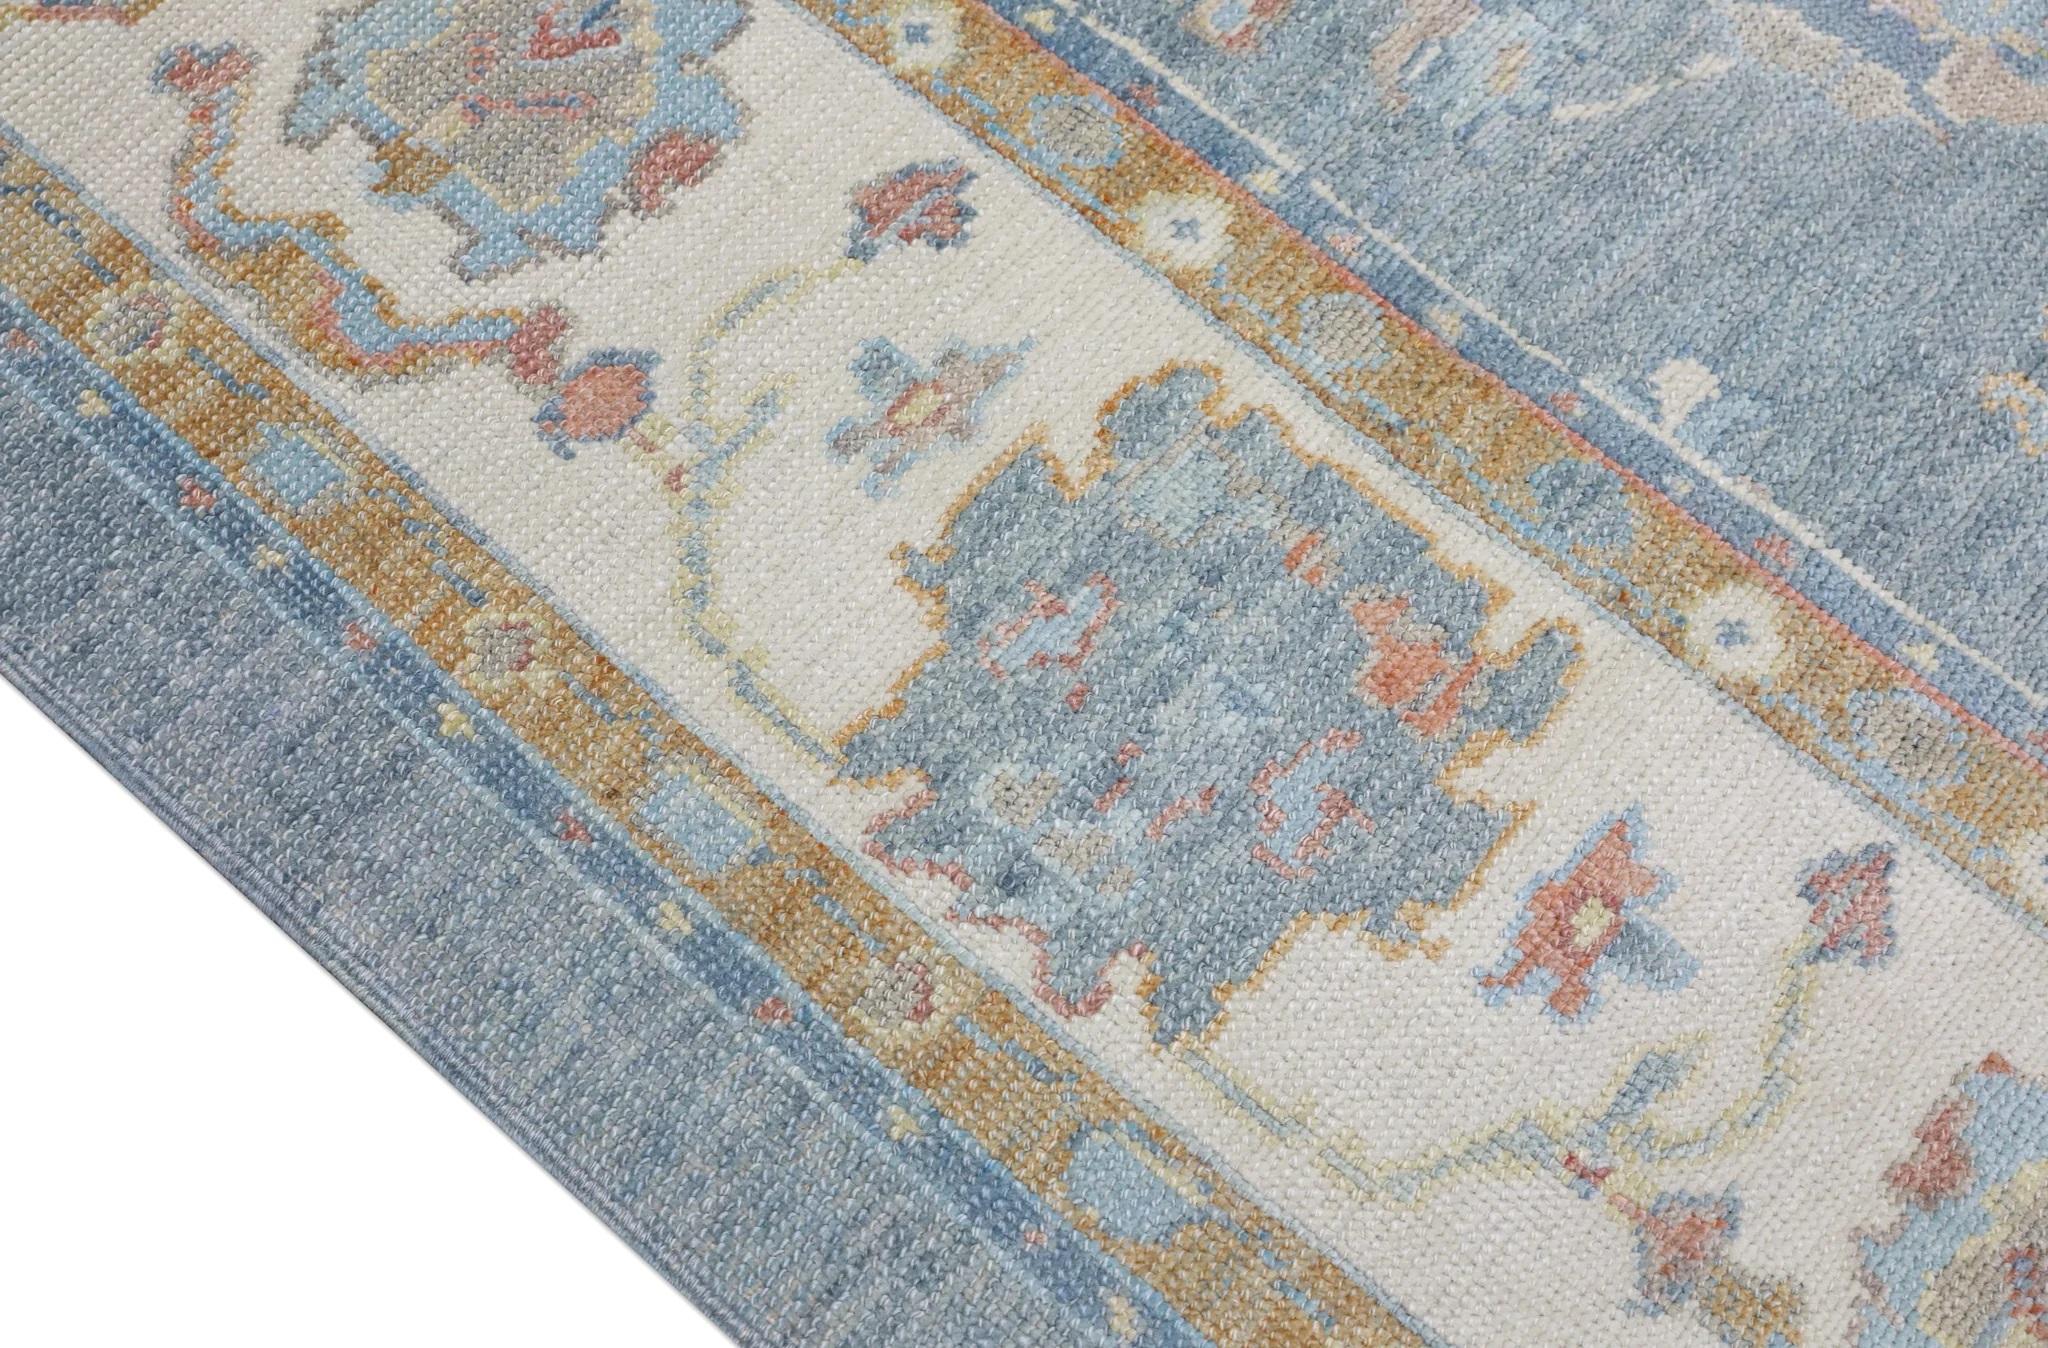 Vegetable Dyed Blue Floral Design Turkish Oushak Rug Made with Handwoven Wool 9'4